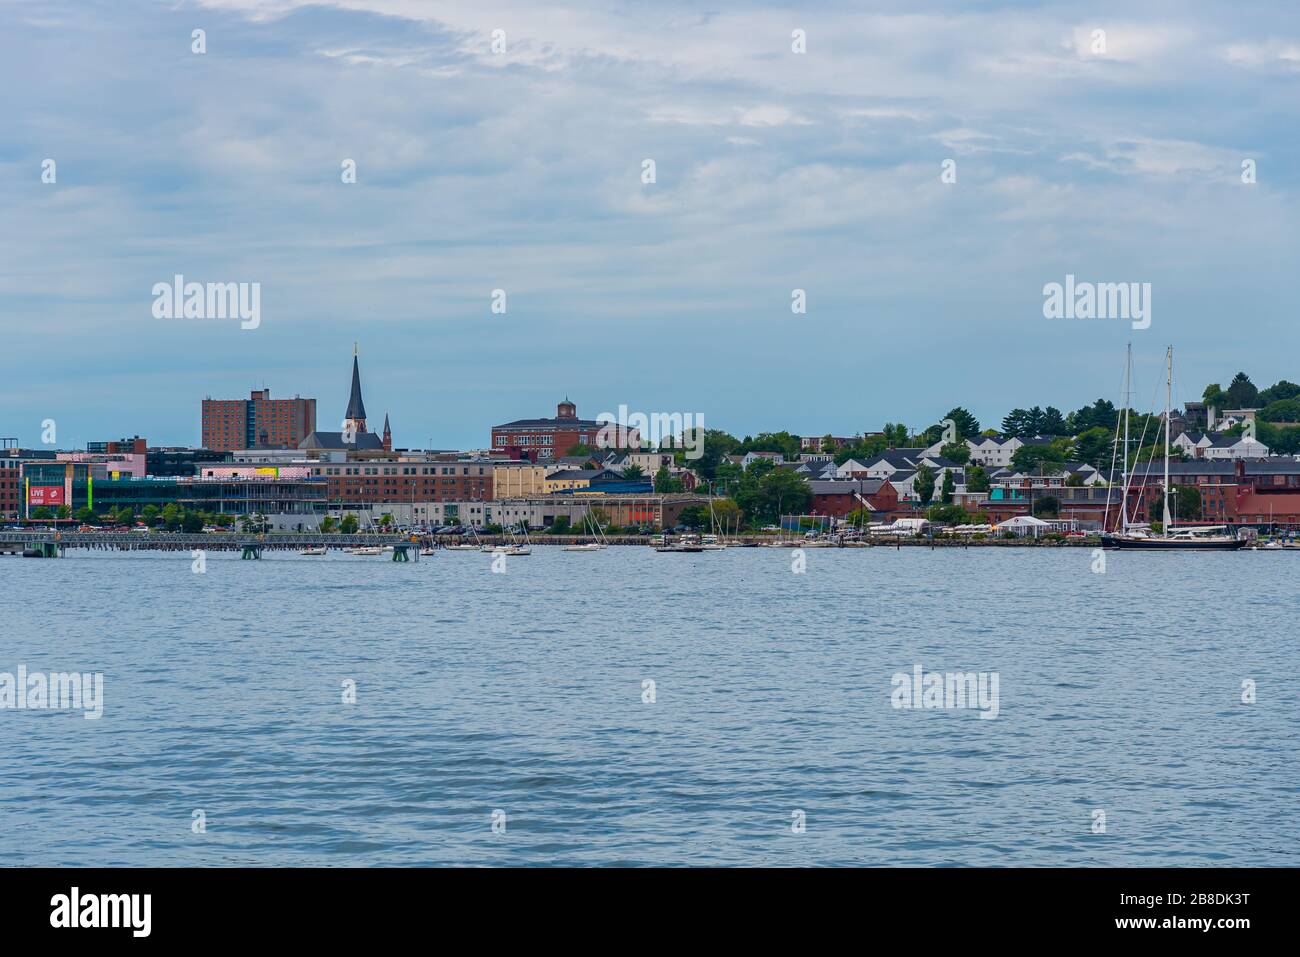 Portland, Maine Aug 11,2018: Amazing view of Portland Maine Downtown seen from the ferry while leaving from Portland, Maine USA Stock Photo